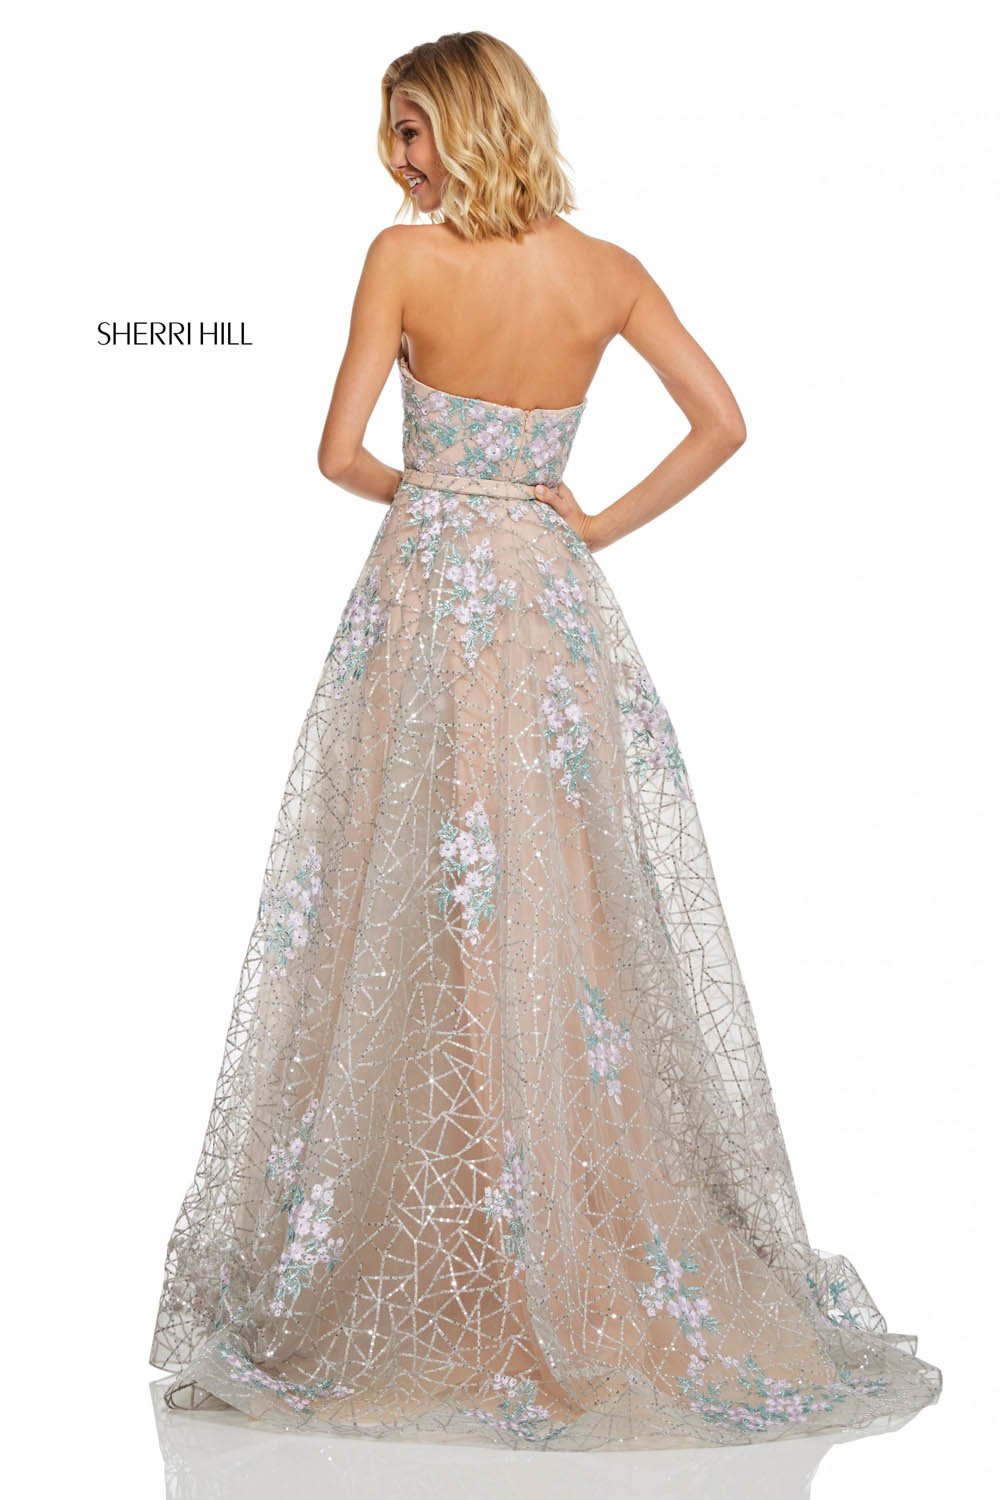 Sherri Hill 52735 dress images in these colors: Silver Lilac.